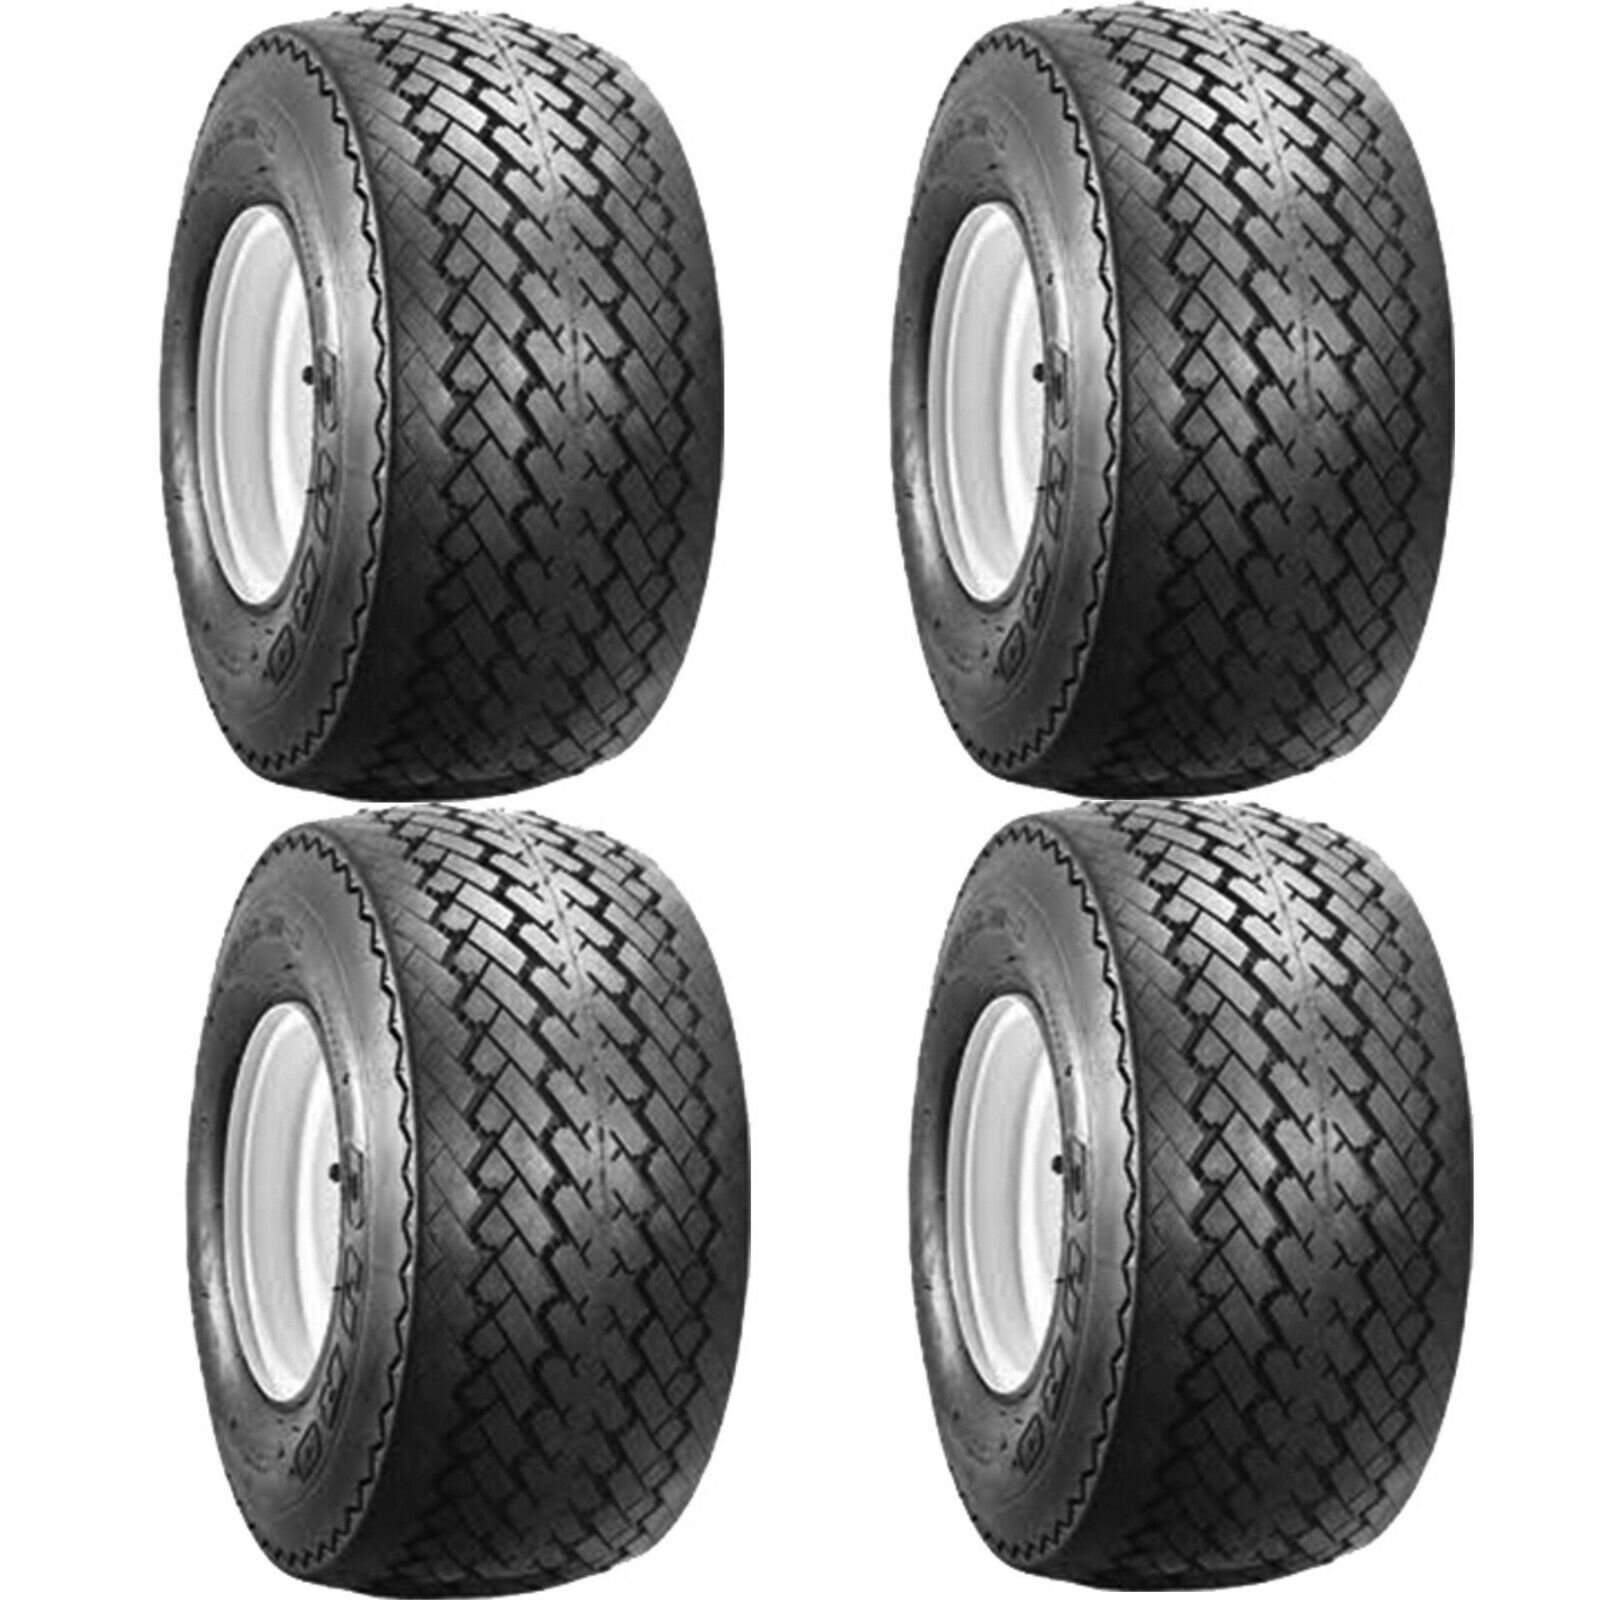 Set of 4 Golf Cart Street Course Tires Only 18x8.5-8 Duro Sawtooth 4 Ply Без бренда 41061